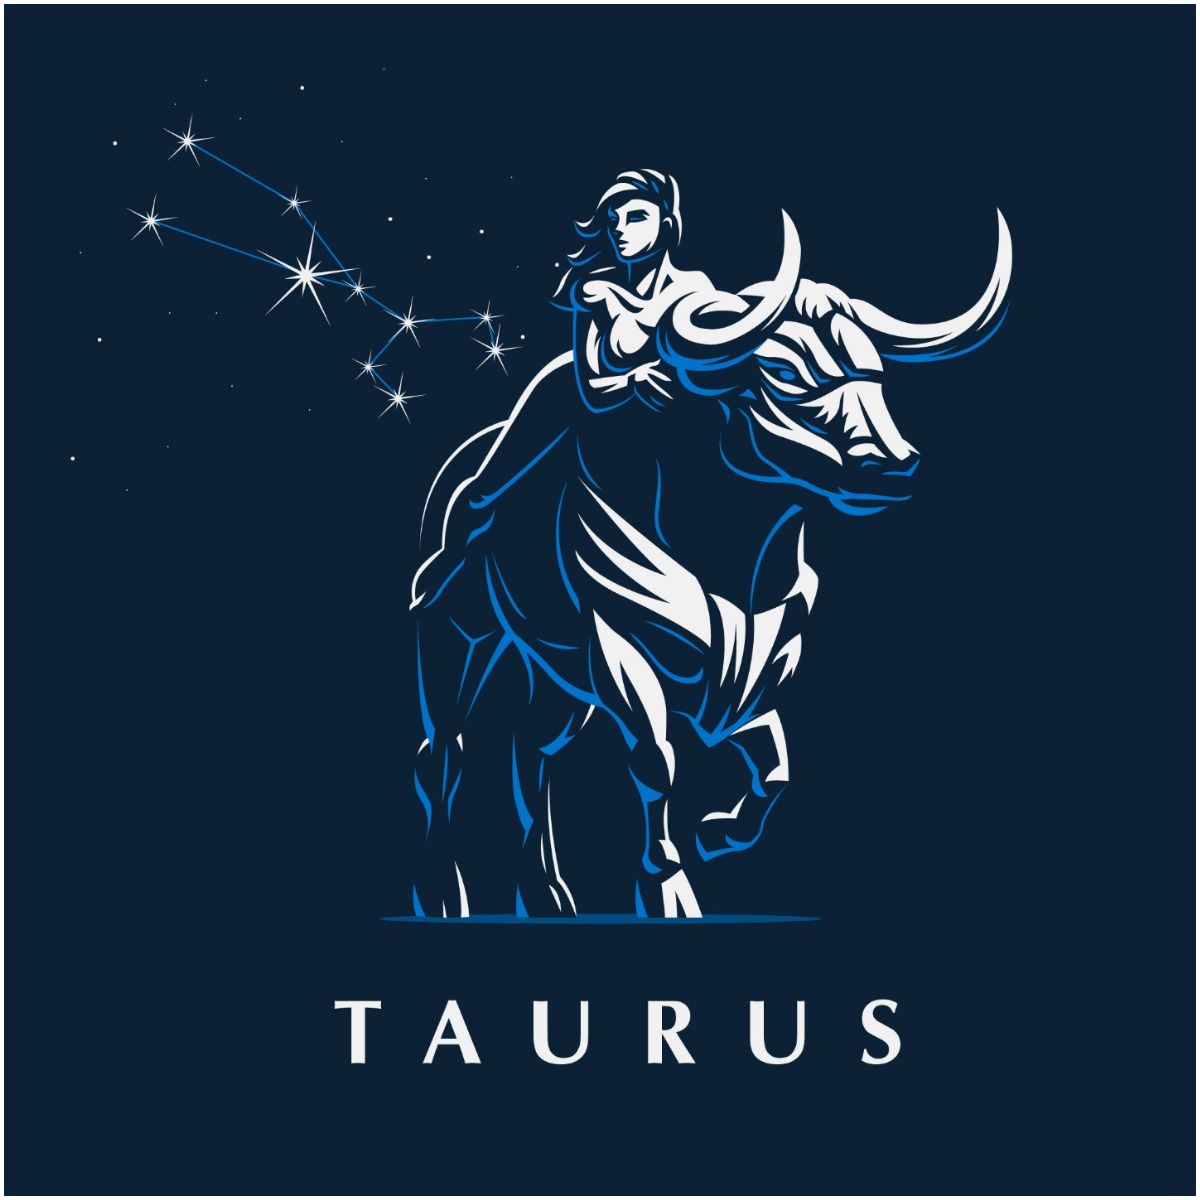 How can a Taurus find love?